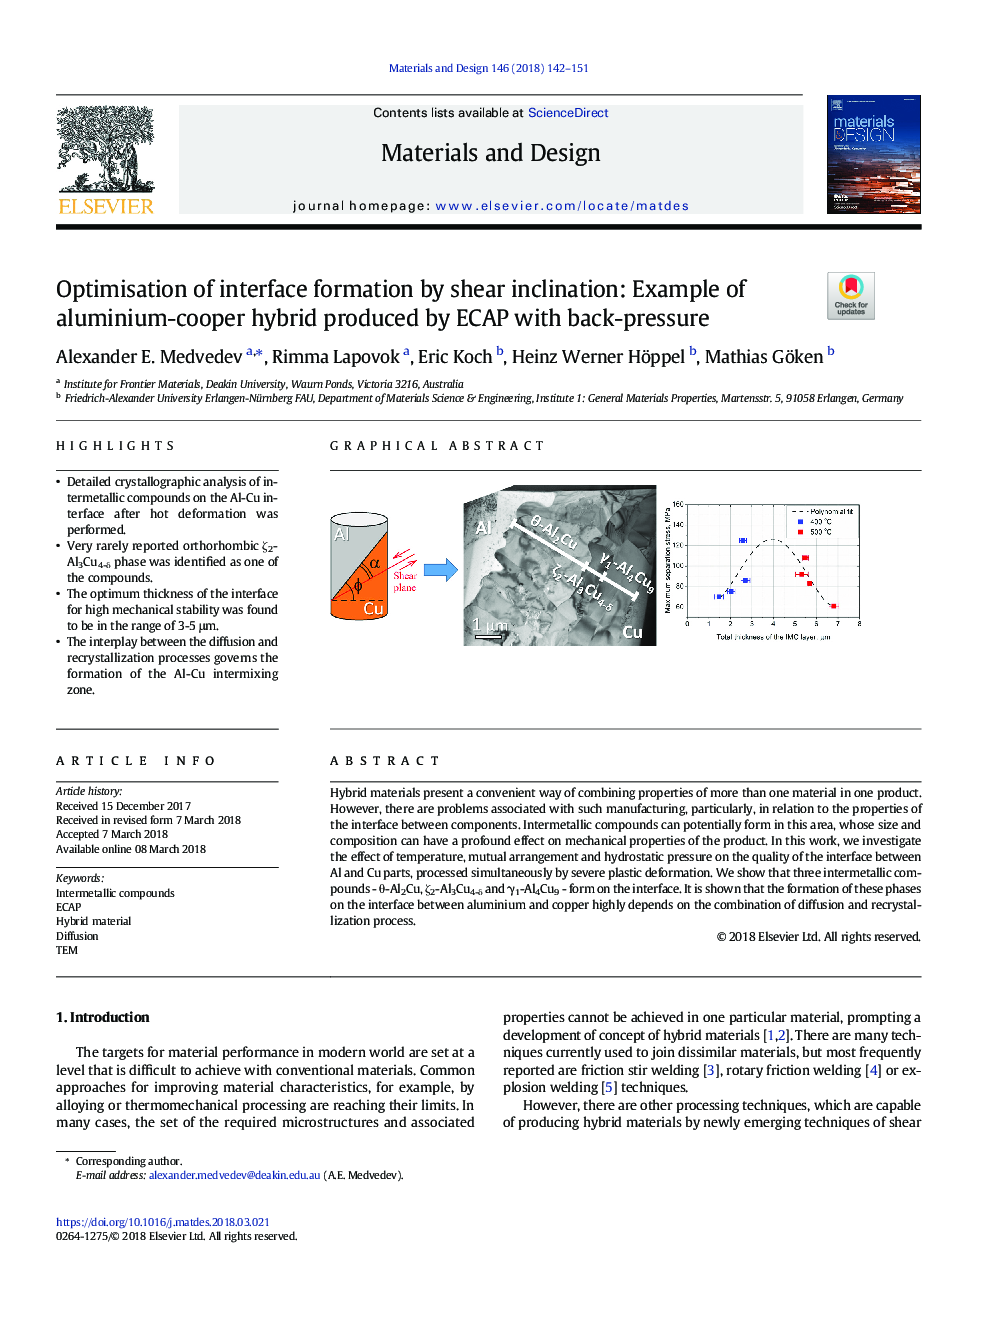 Optimisation of interface formation by shear inclination: Example of aluminium-copper hybrid produced by ECAP with back-pressure